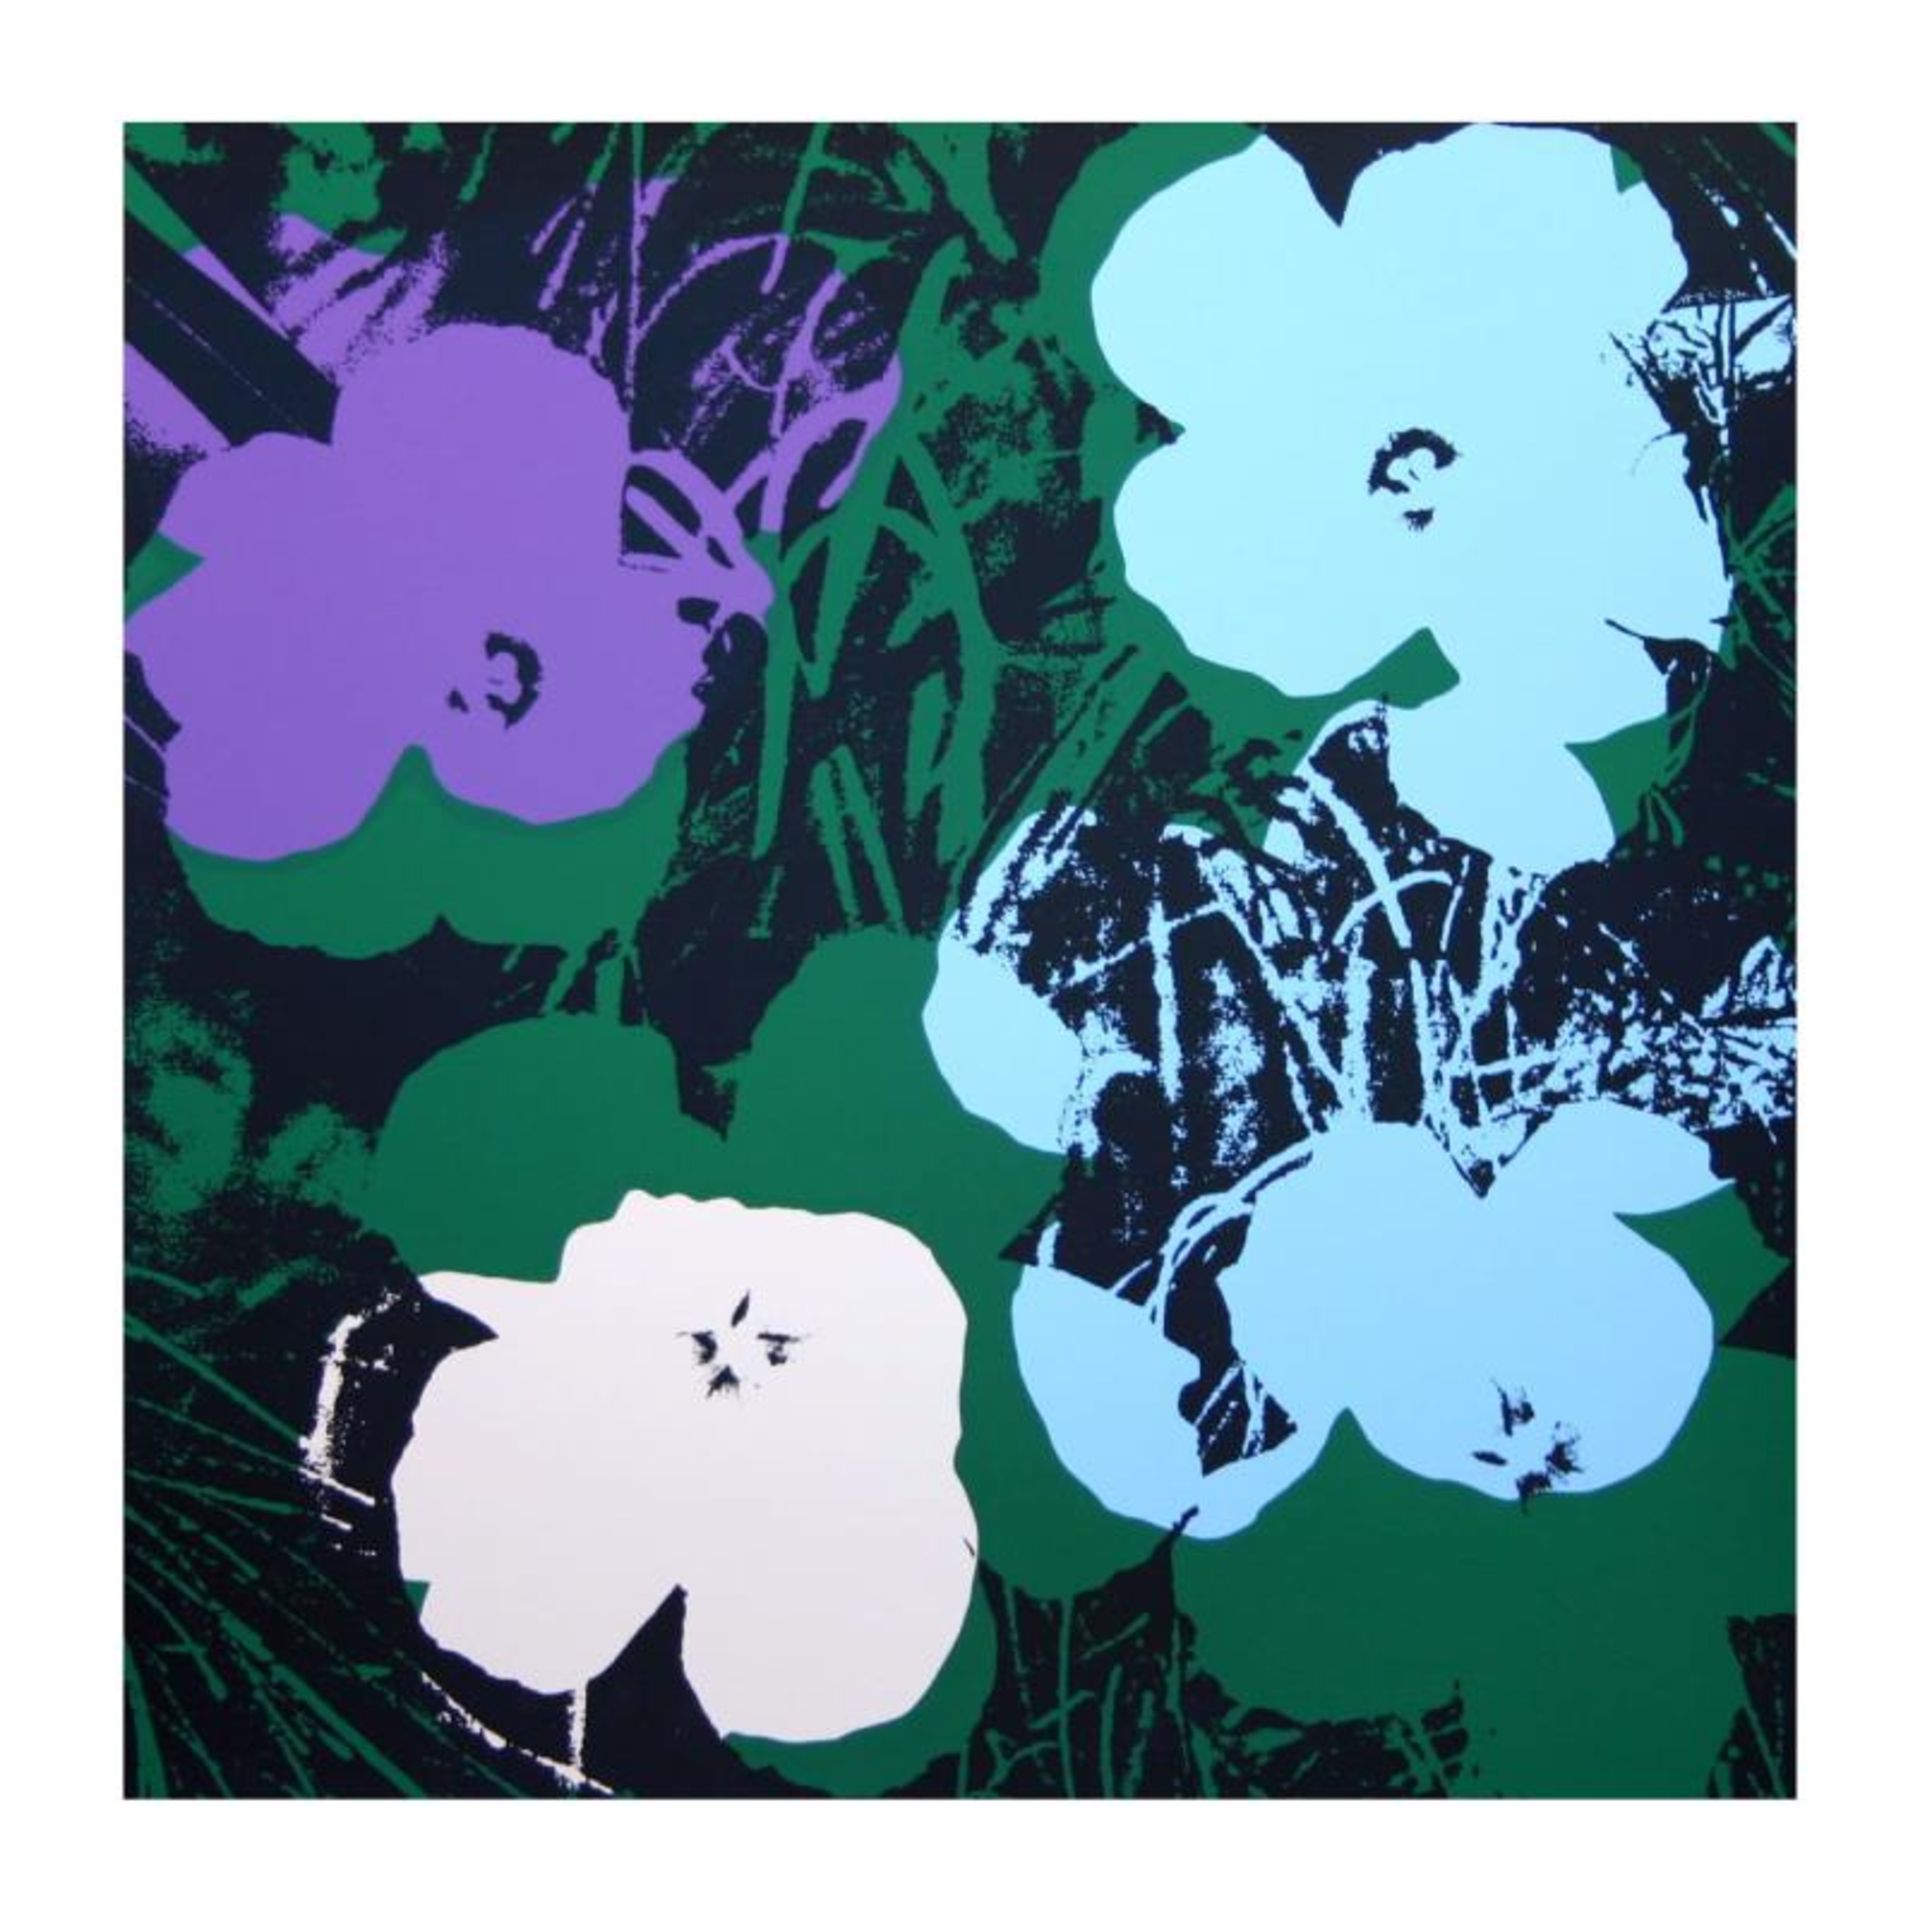 Andy Warhol "Flowers Portfolio" Suite of 10 Silk Screen Prints from Sunday B Mor - Image 2 of 3